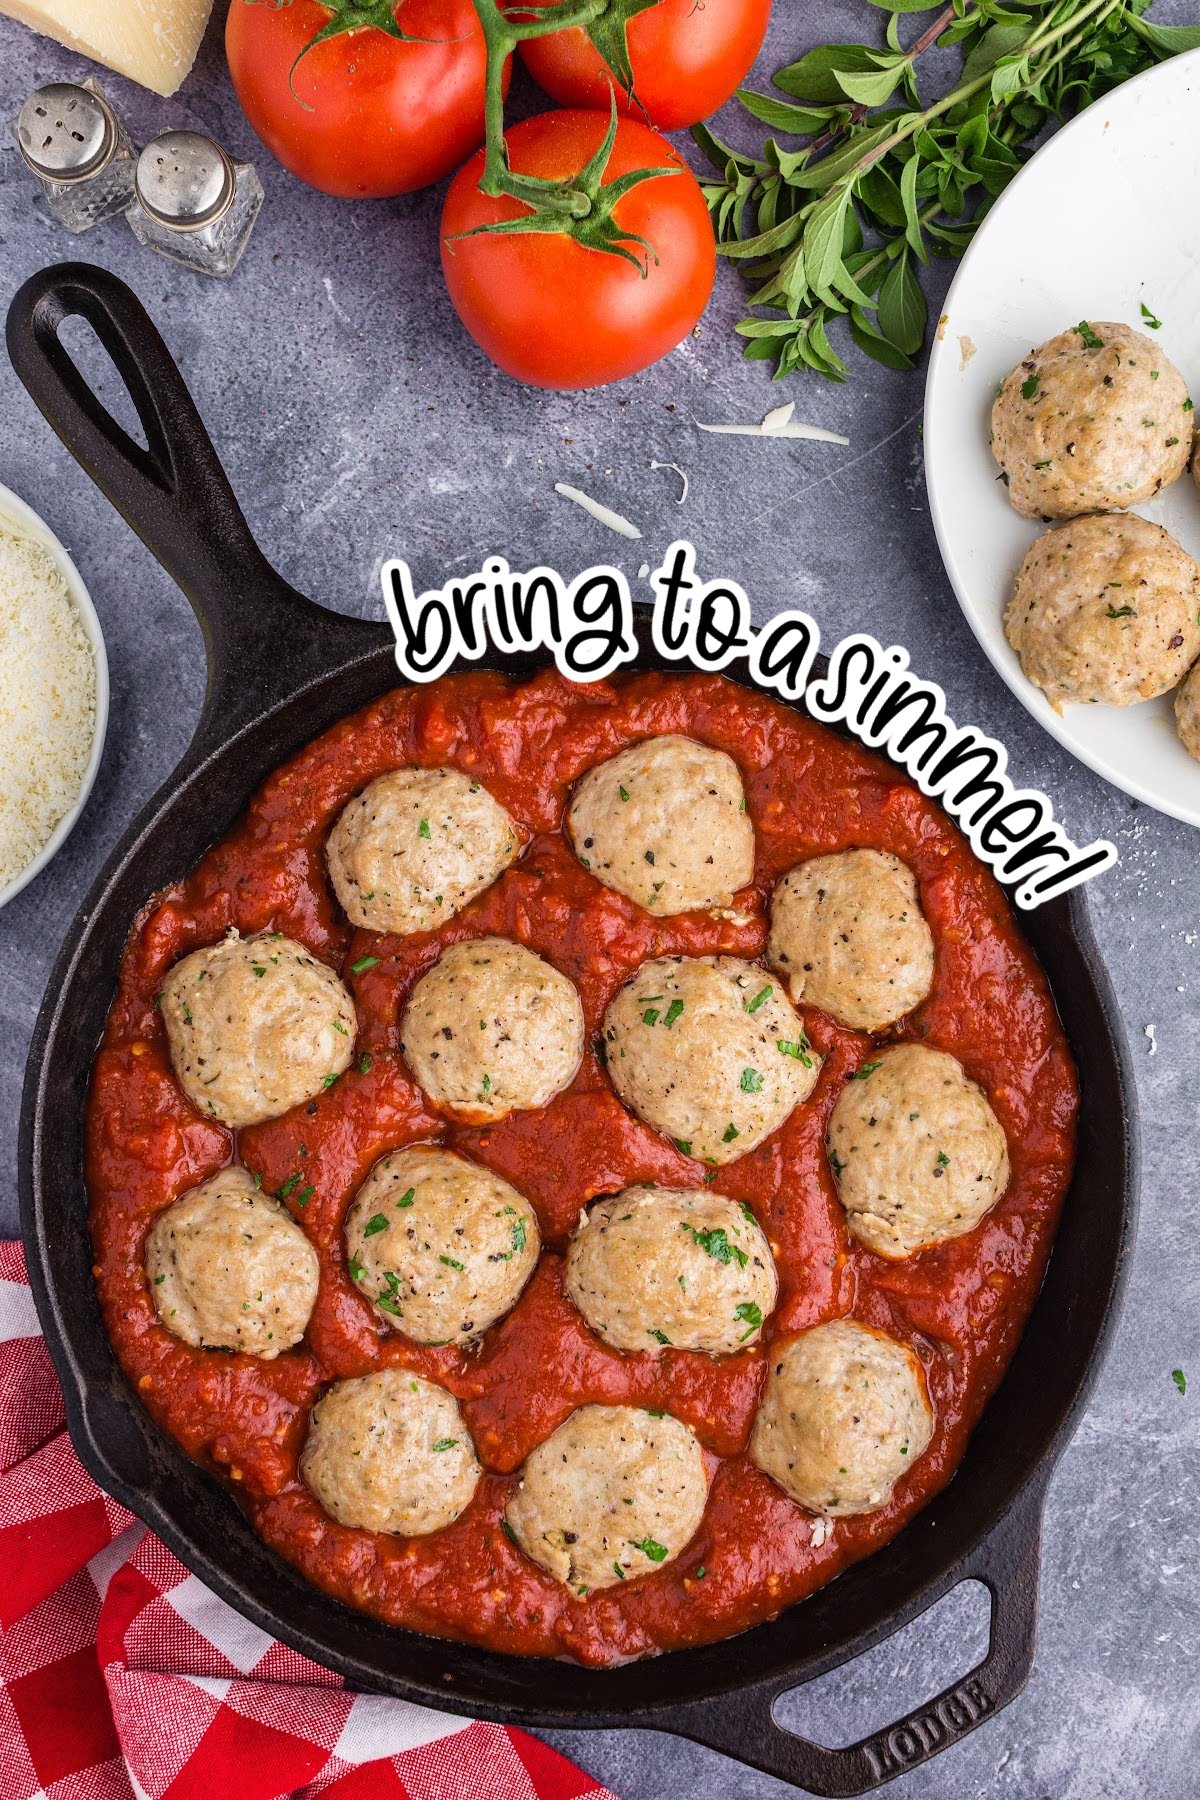 Placed the meatballs into the marinara into the skillet.